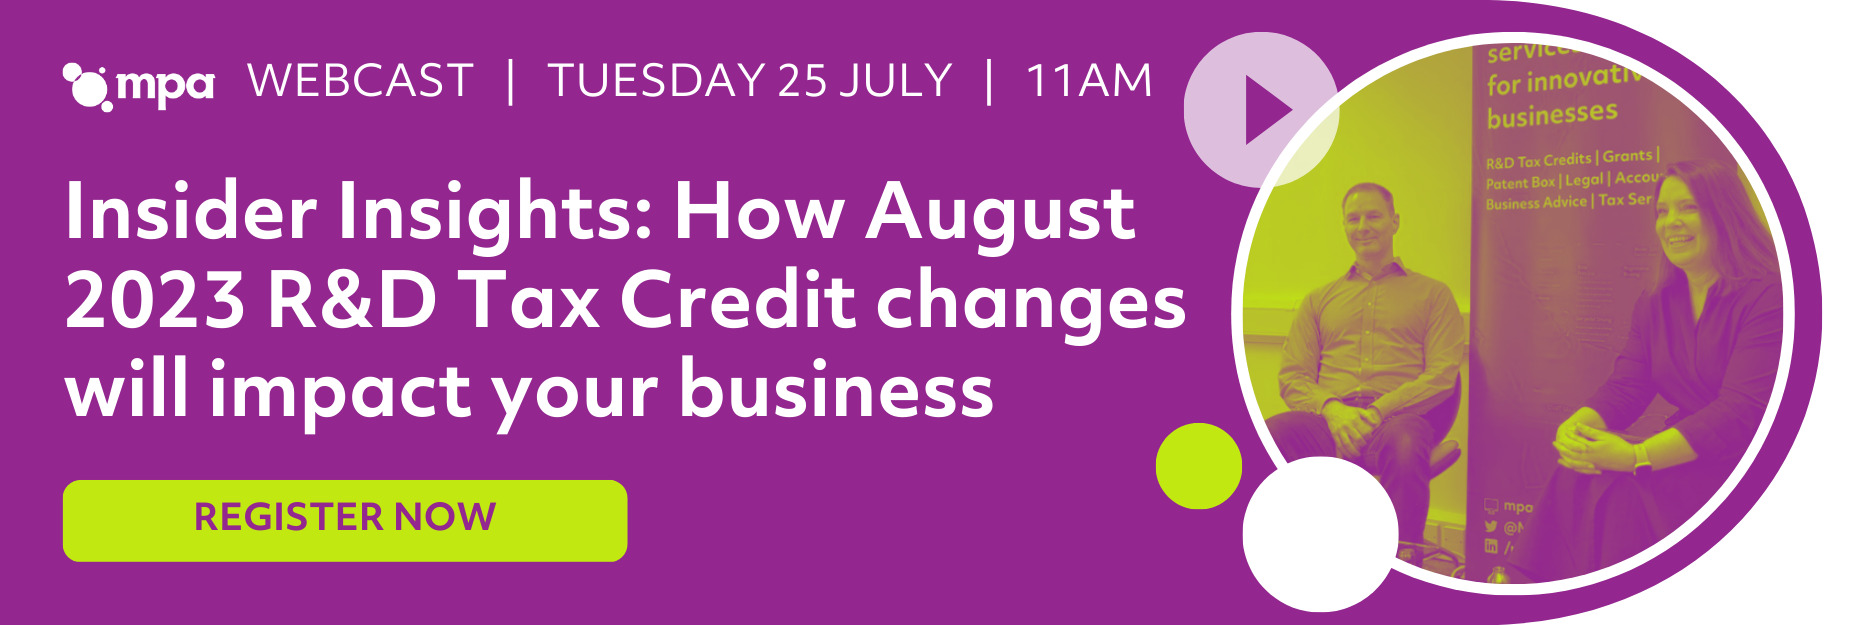 Insider Insights: how August 2023 R&D Tax Credit changes will impact your business image